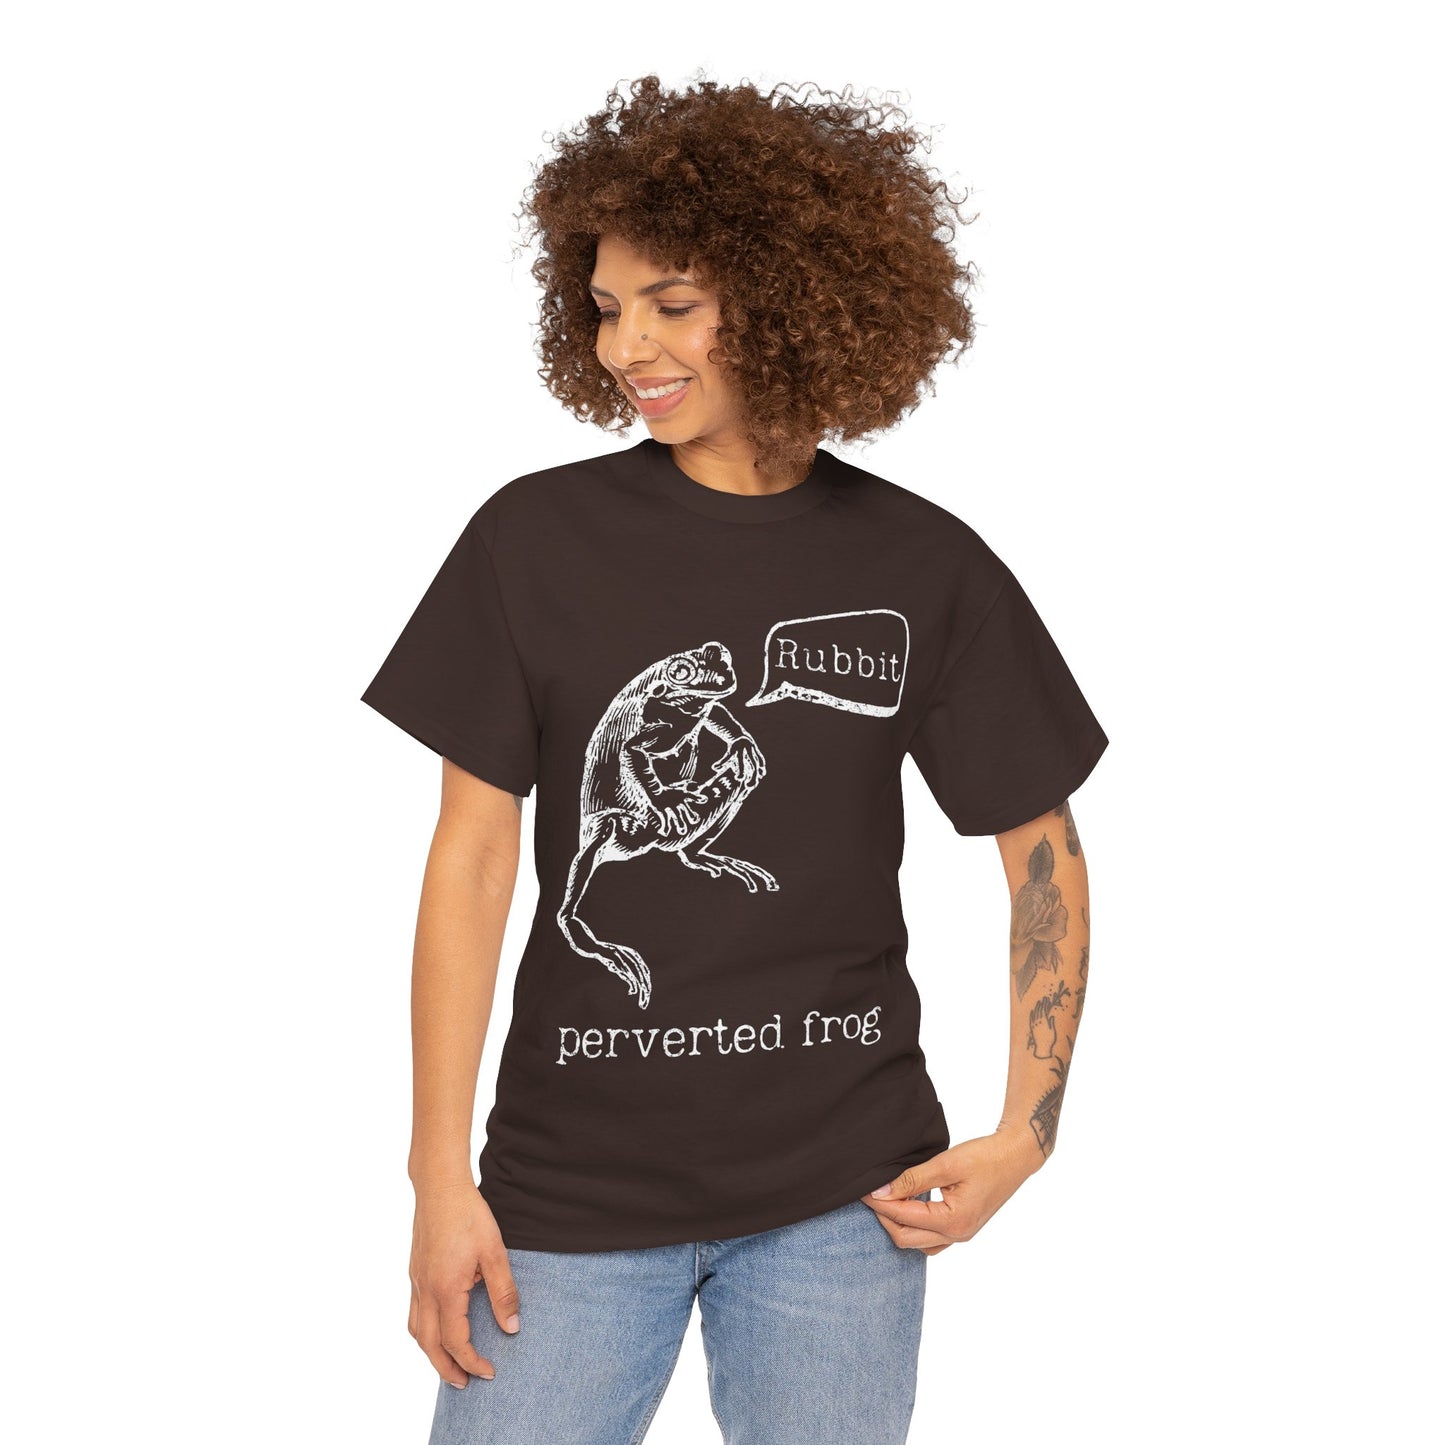 Perverted Frog Funny T-Shirt